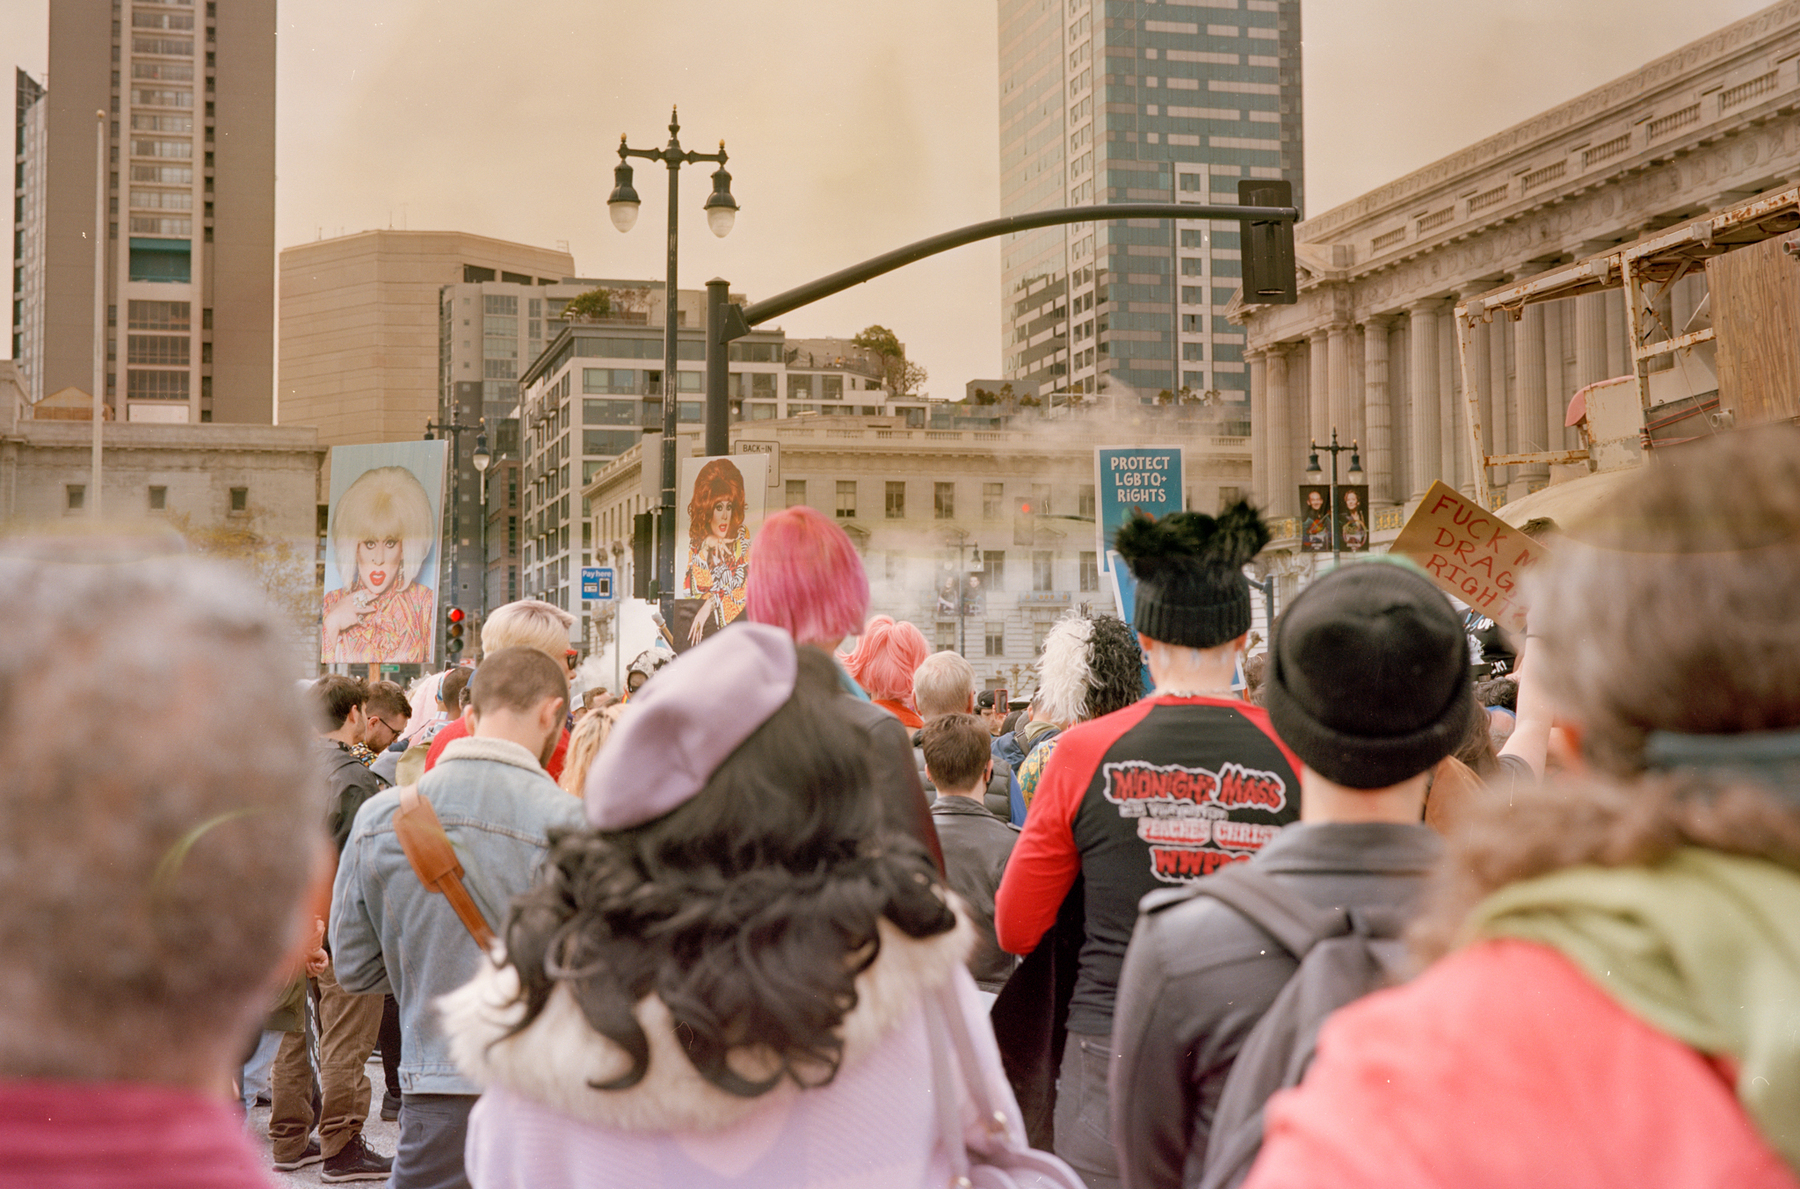 a scan of a color photo showing people marching together at a trans rally